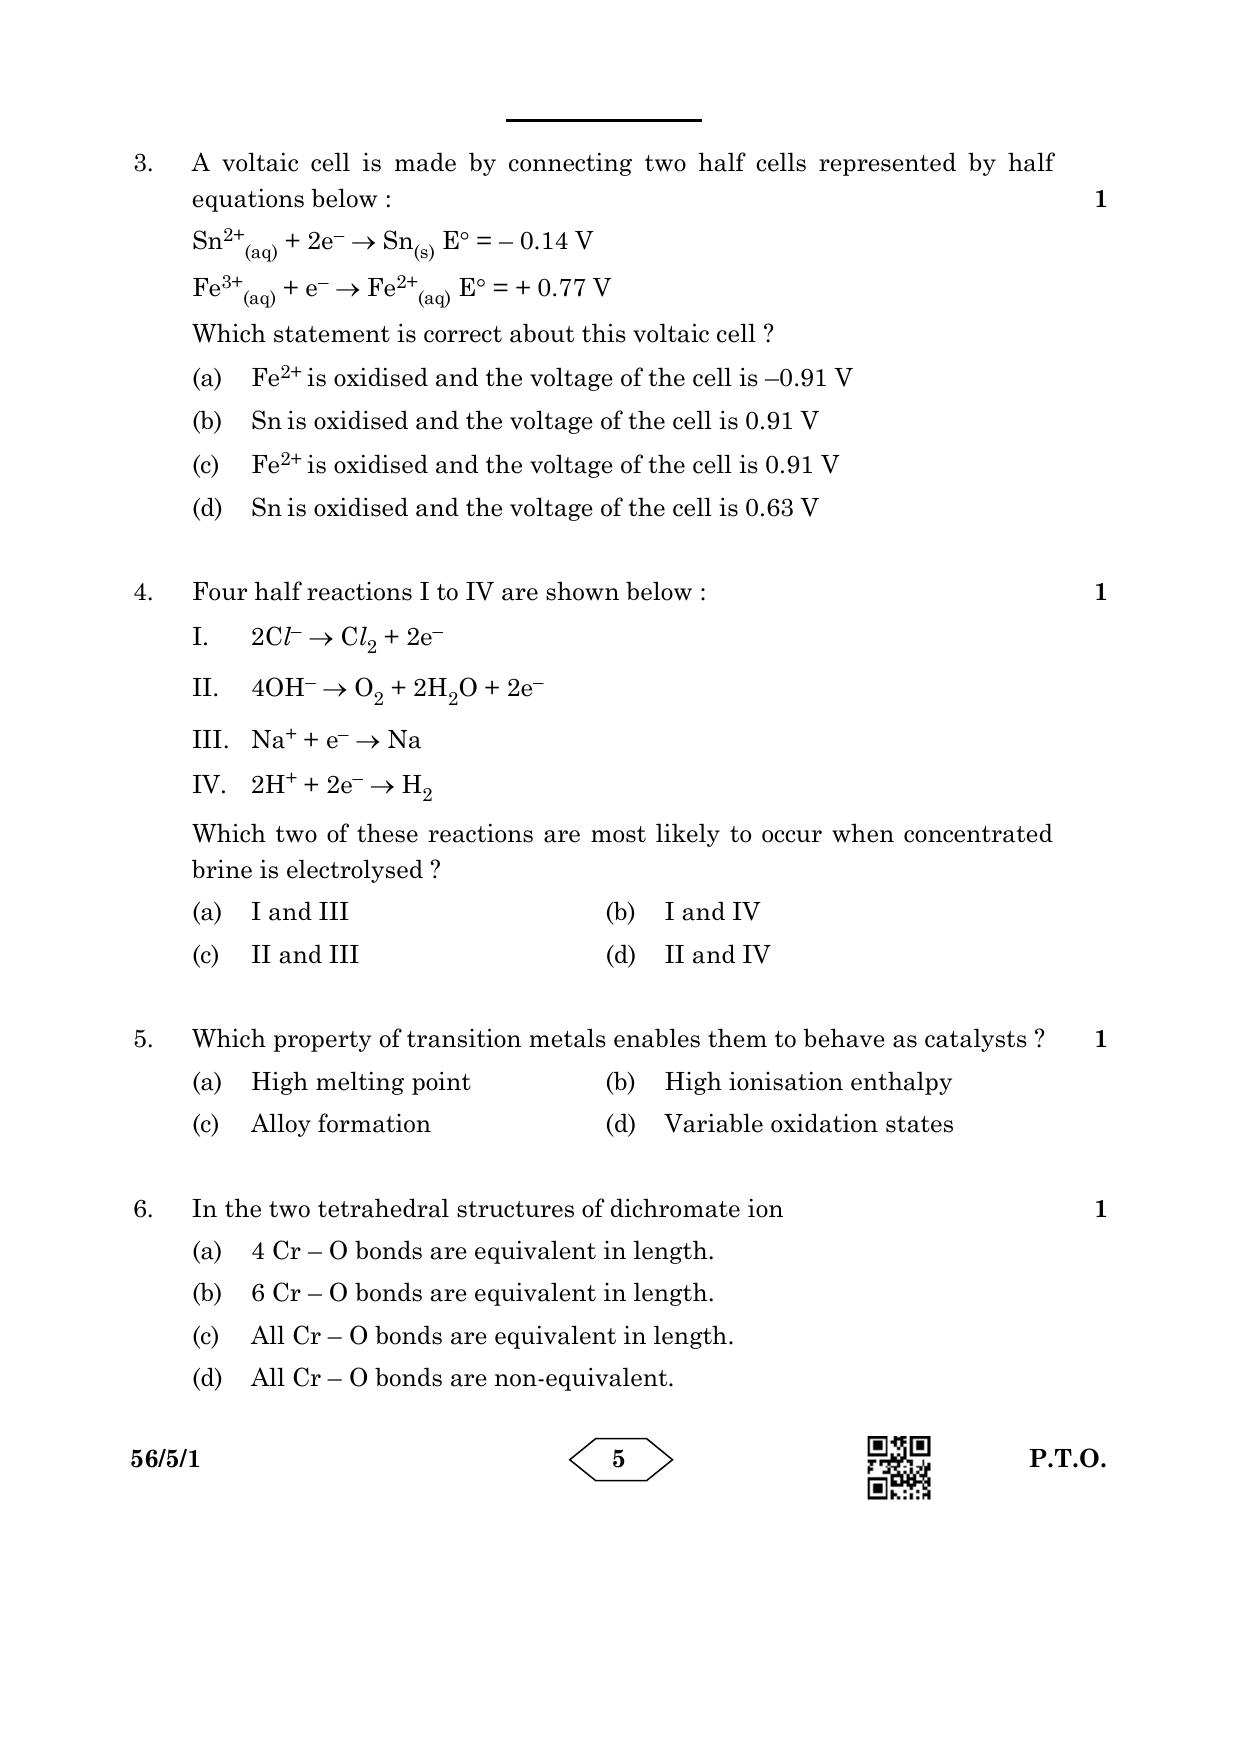 CBSE Class 12 56-5-1 Chemistry 2023 Question Paper - Page 5